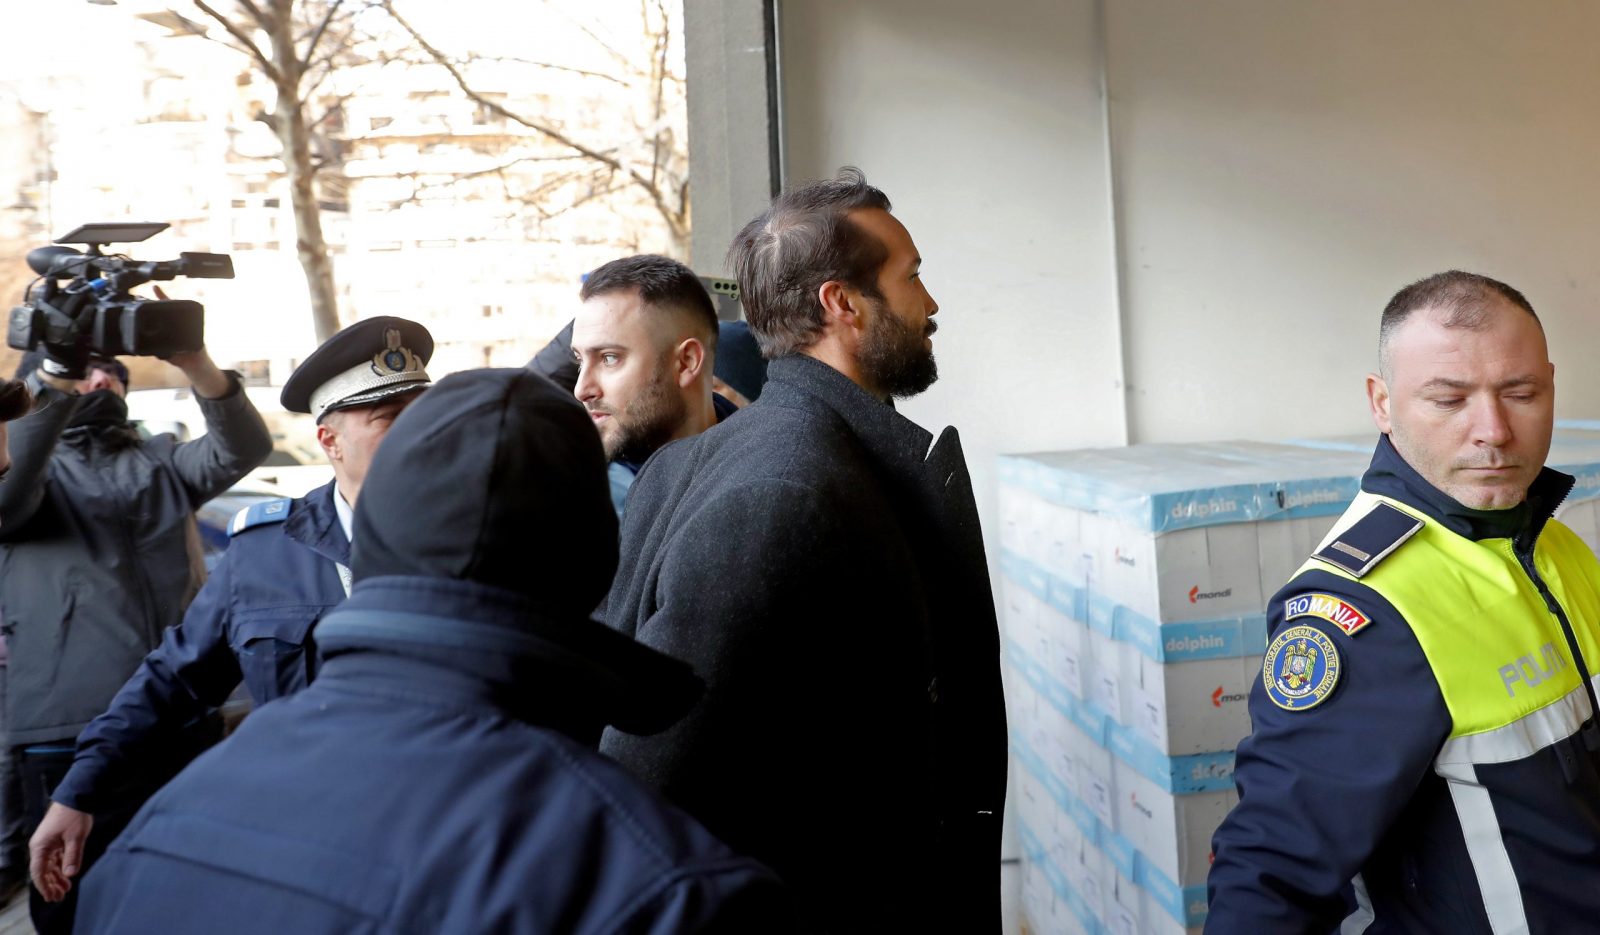 epa10464608 Tristan Tate (C), the brother of former professional kickboxer and social media influencer Andrew Tate (not pictured) is escorted by police officers to the Directorate for Investigating Organized Crime and Terrorism (DIICOT) headquarters to be questioned in Bucharest, Romania, 13 February 2023. On 29 December 2022, Andrew Tate and his brother Tristan were arrested as a result of the DIICOT inquiry under the charges of human trafficking and intention to form an organized crime group. Romanian police stated that the two brothers and their associates coerced victims for creating a paid pornography service for social media platforms.  EPA/ROBERT GHEMENT